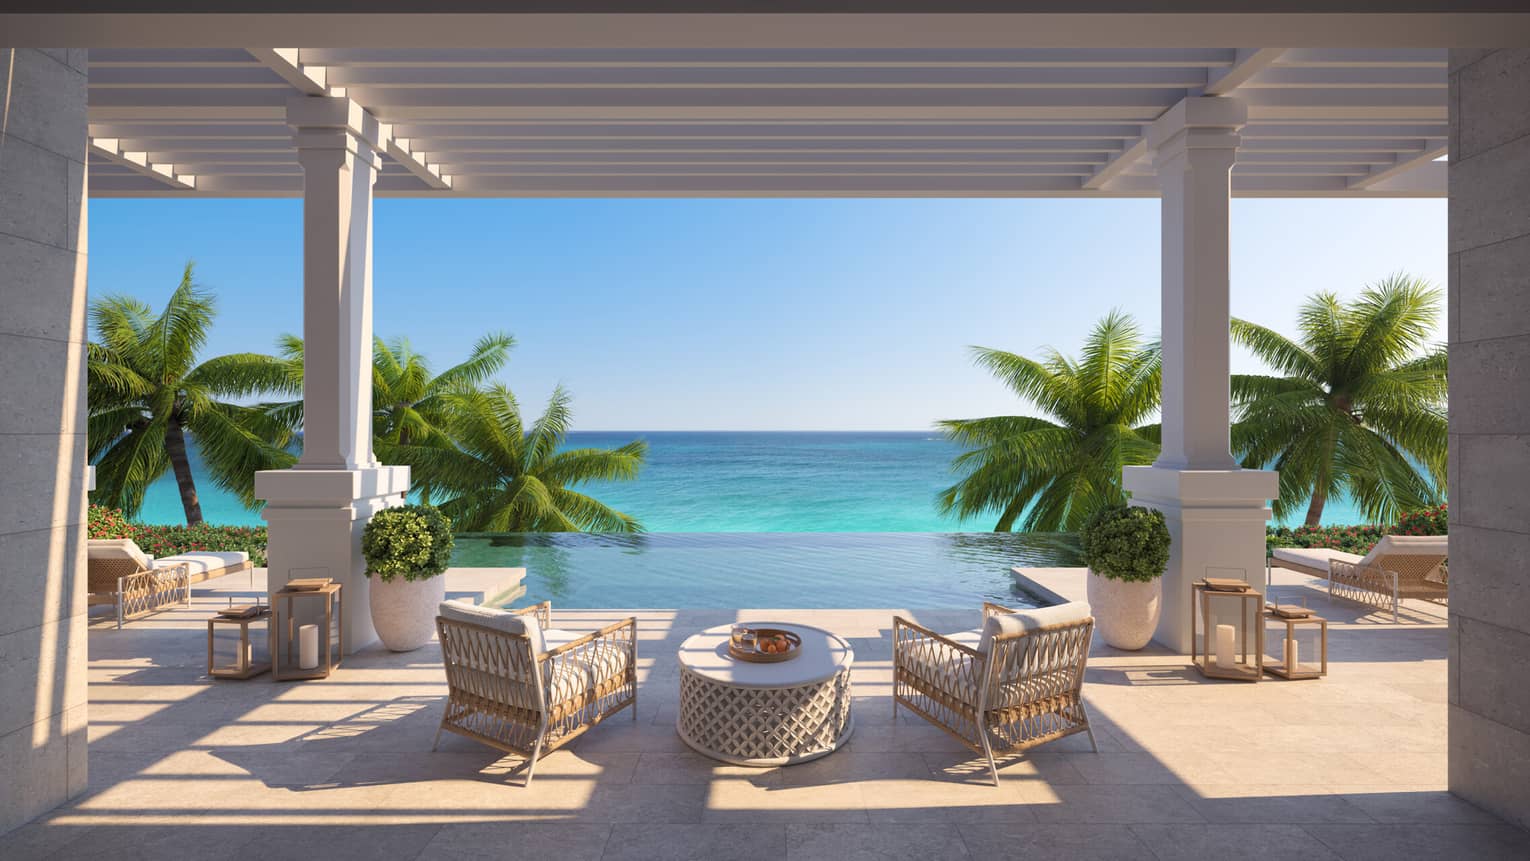 ,Rendering of a modern residence outdoor seating area with an ocean view